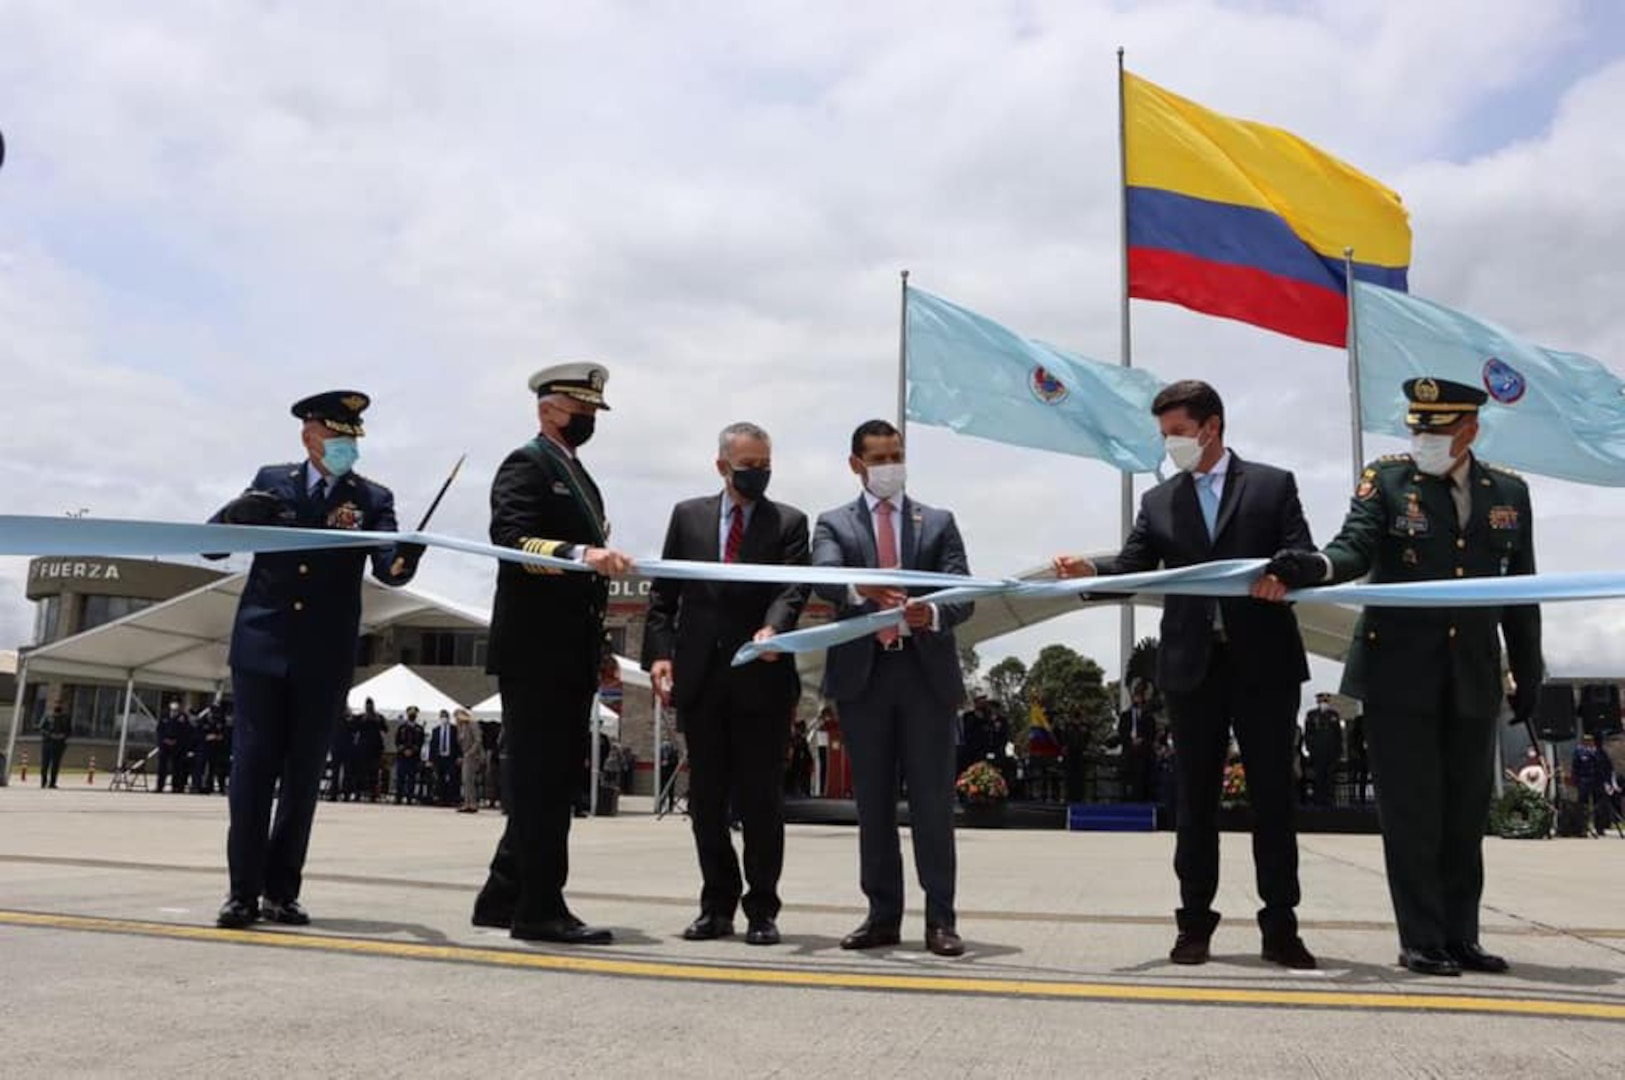 U.S. Navy Adm. Craig S. Faller, commander of U.S. Southern Command, takes part in a ceremony as the U.S. donates two C-130H Hercules aircraft to Colombia’s Military Air Transport Command.